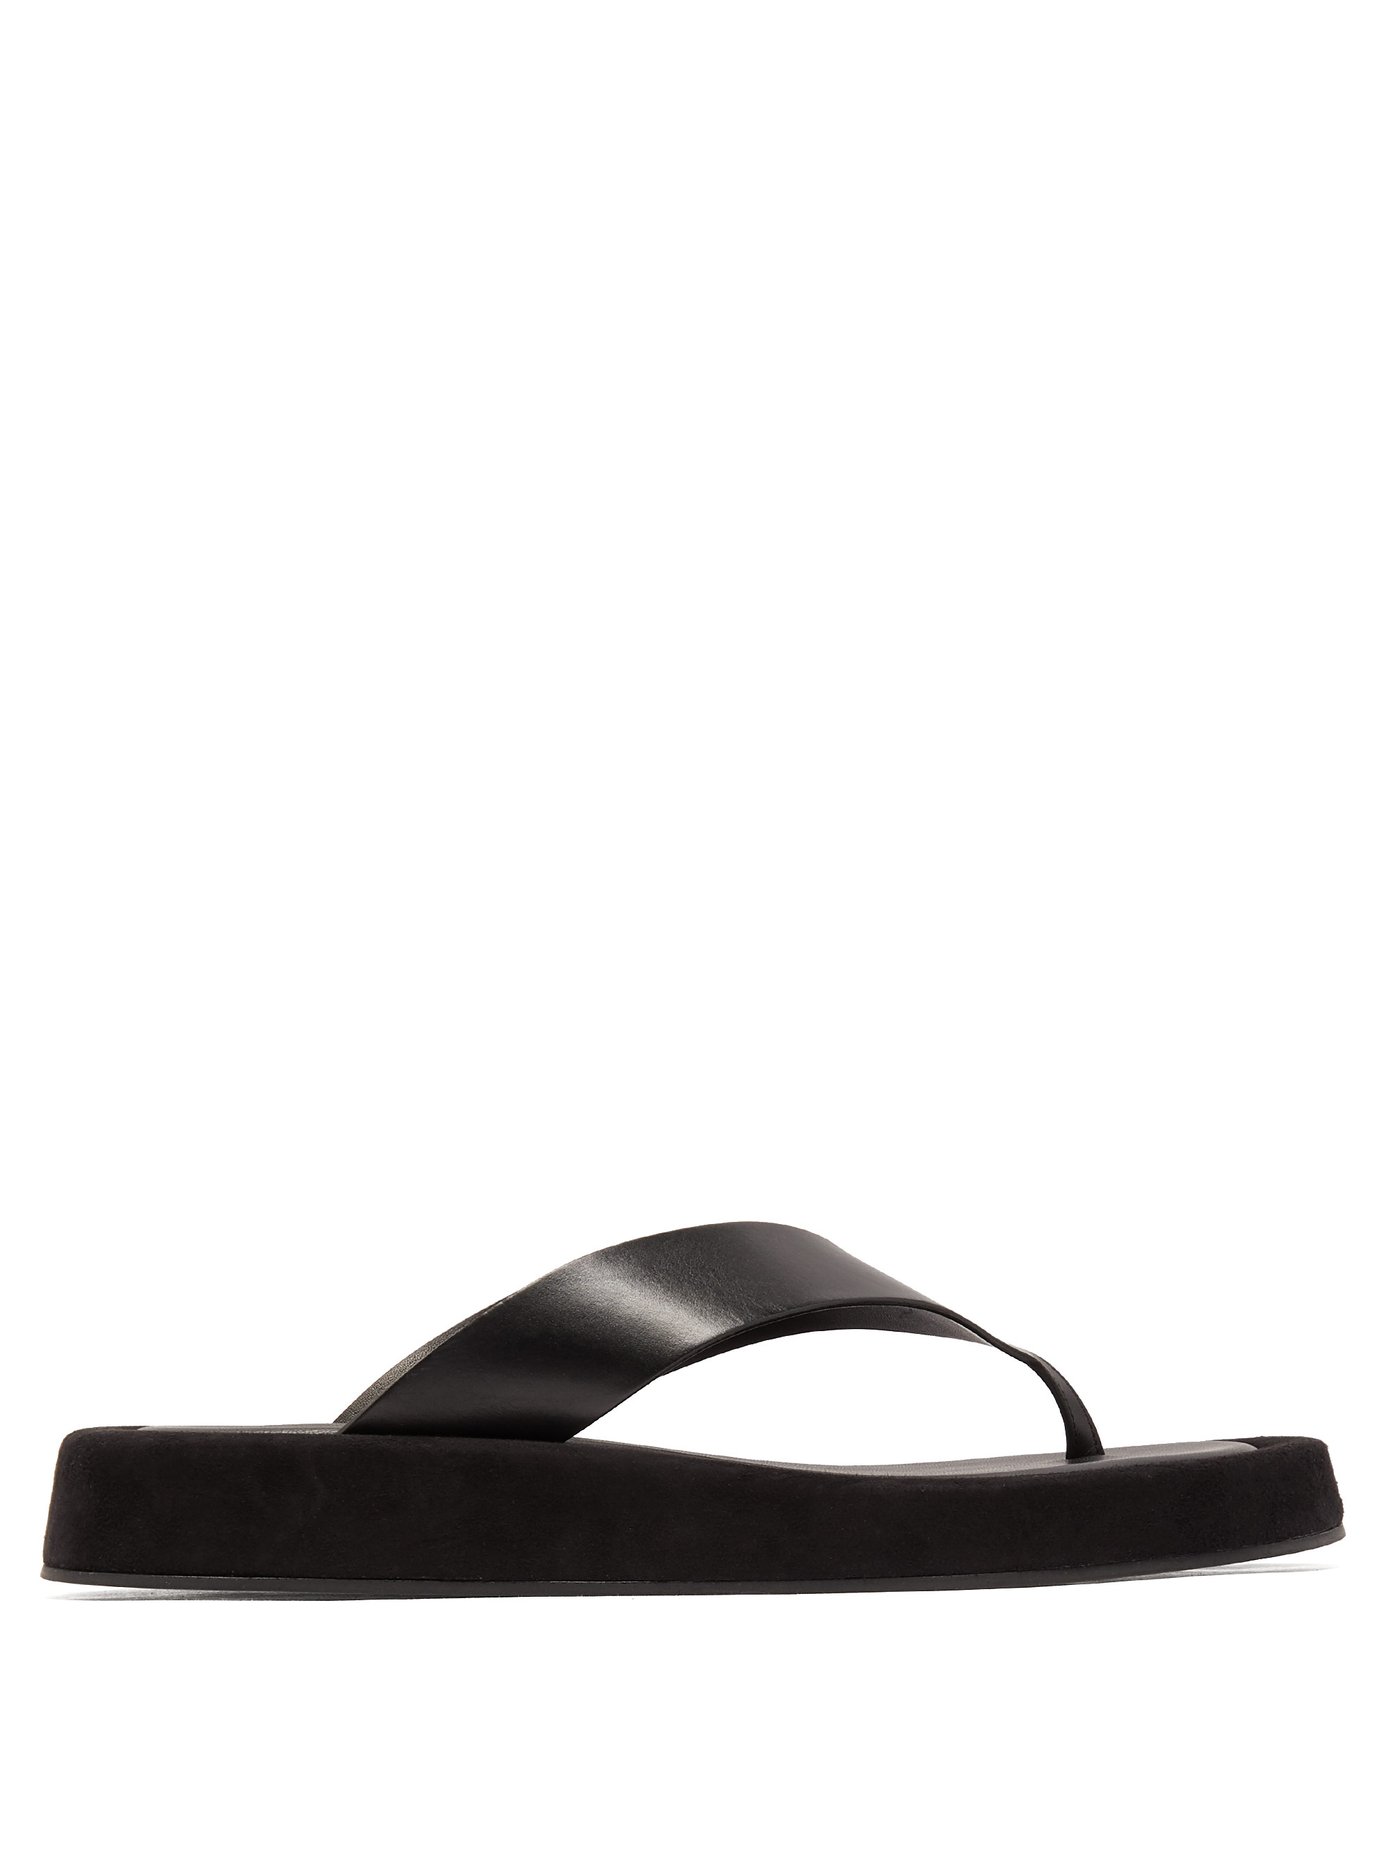 Ginza leather sandals | The Row 